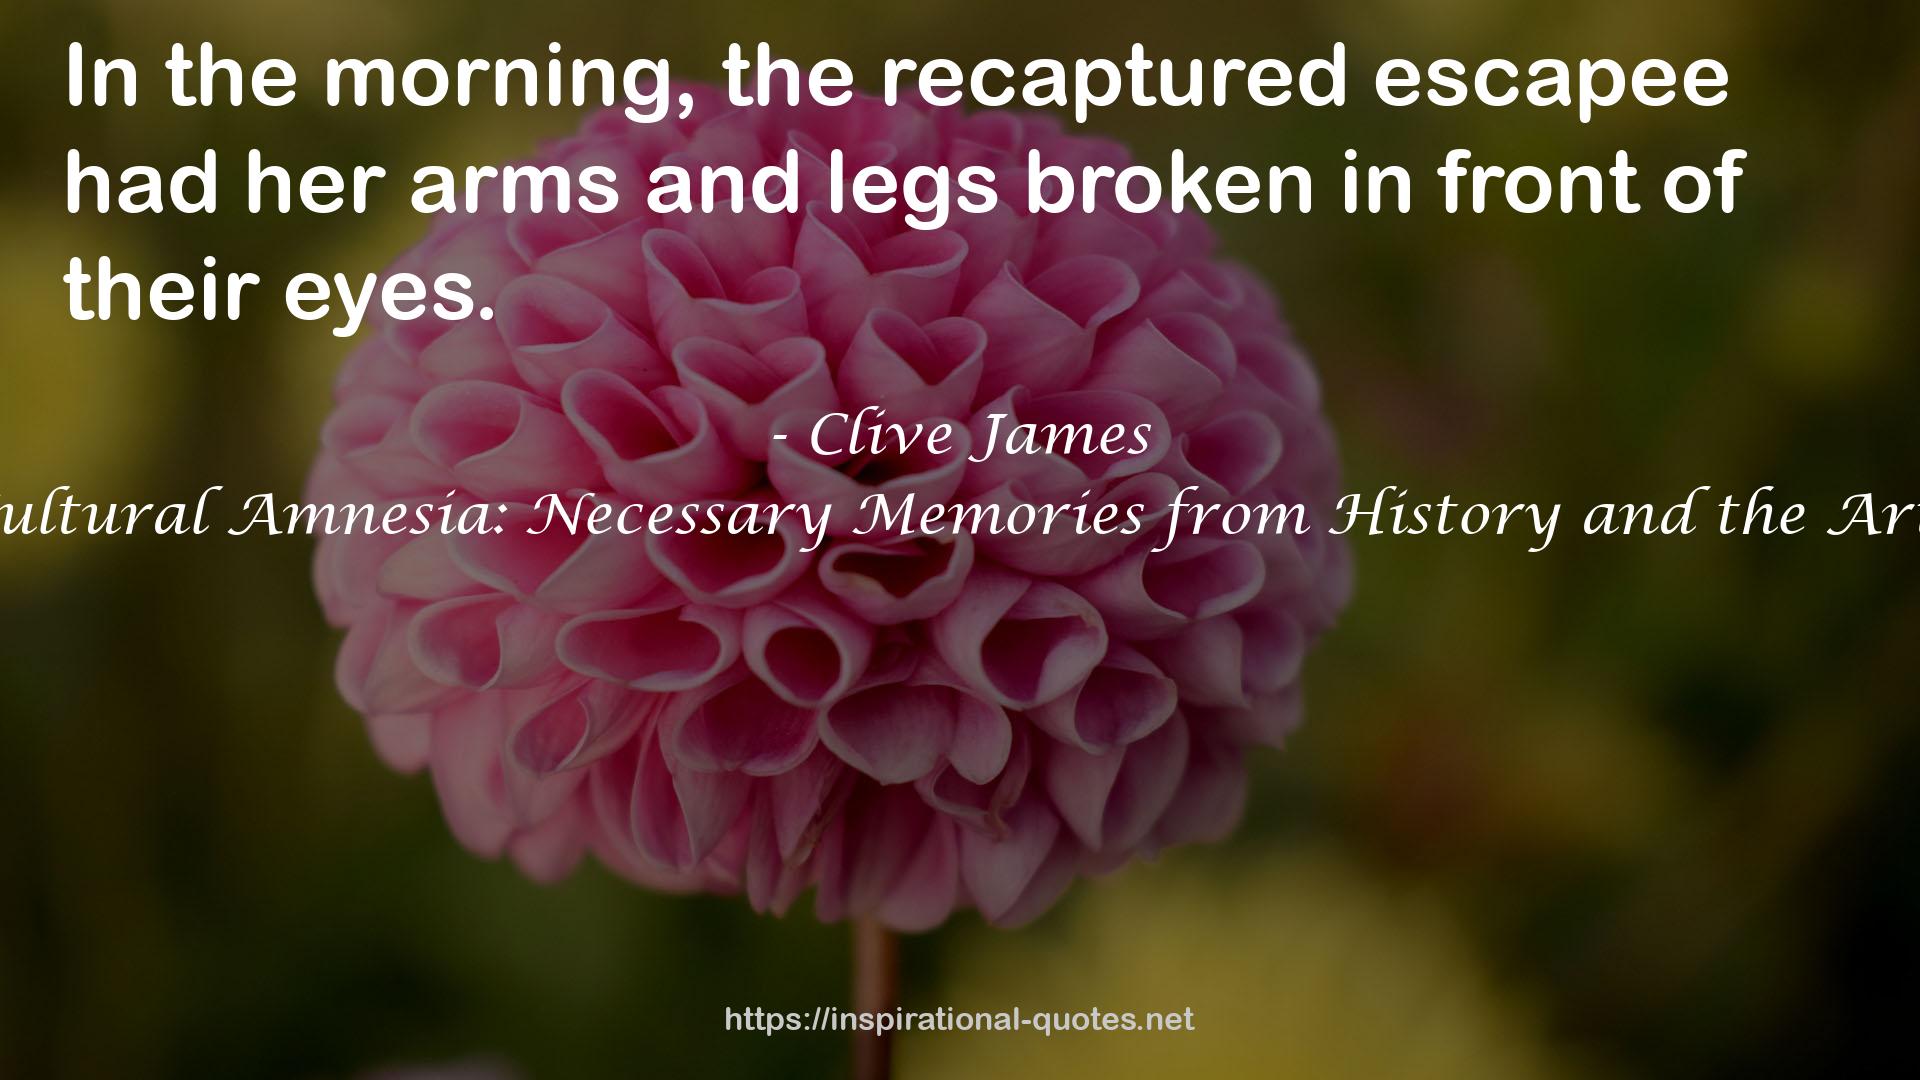 Cultural Amnesia: Necessary Memories from History and the Arts QUOTES